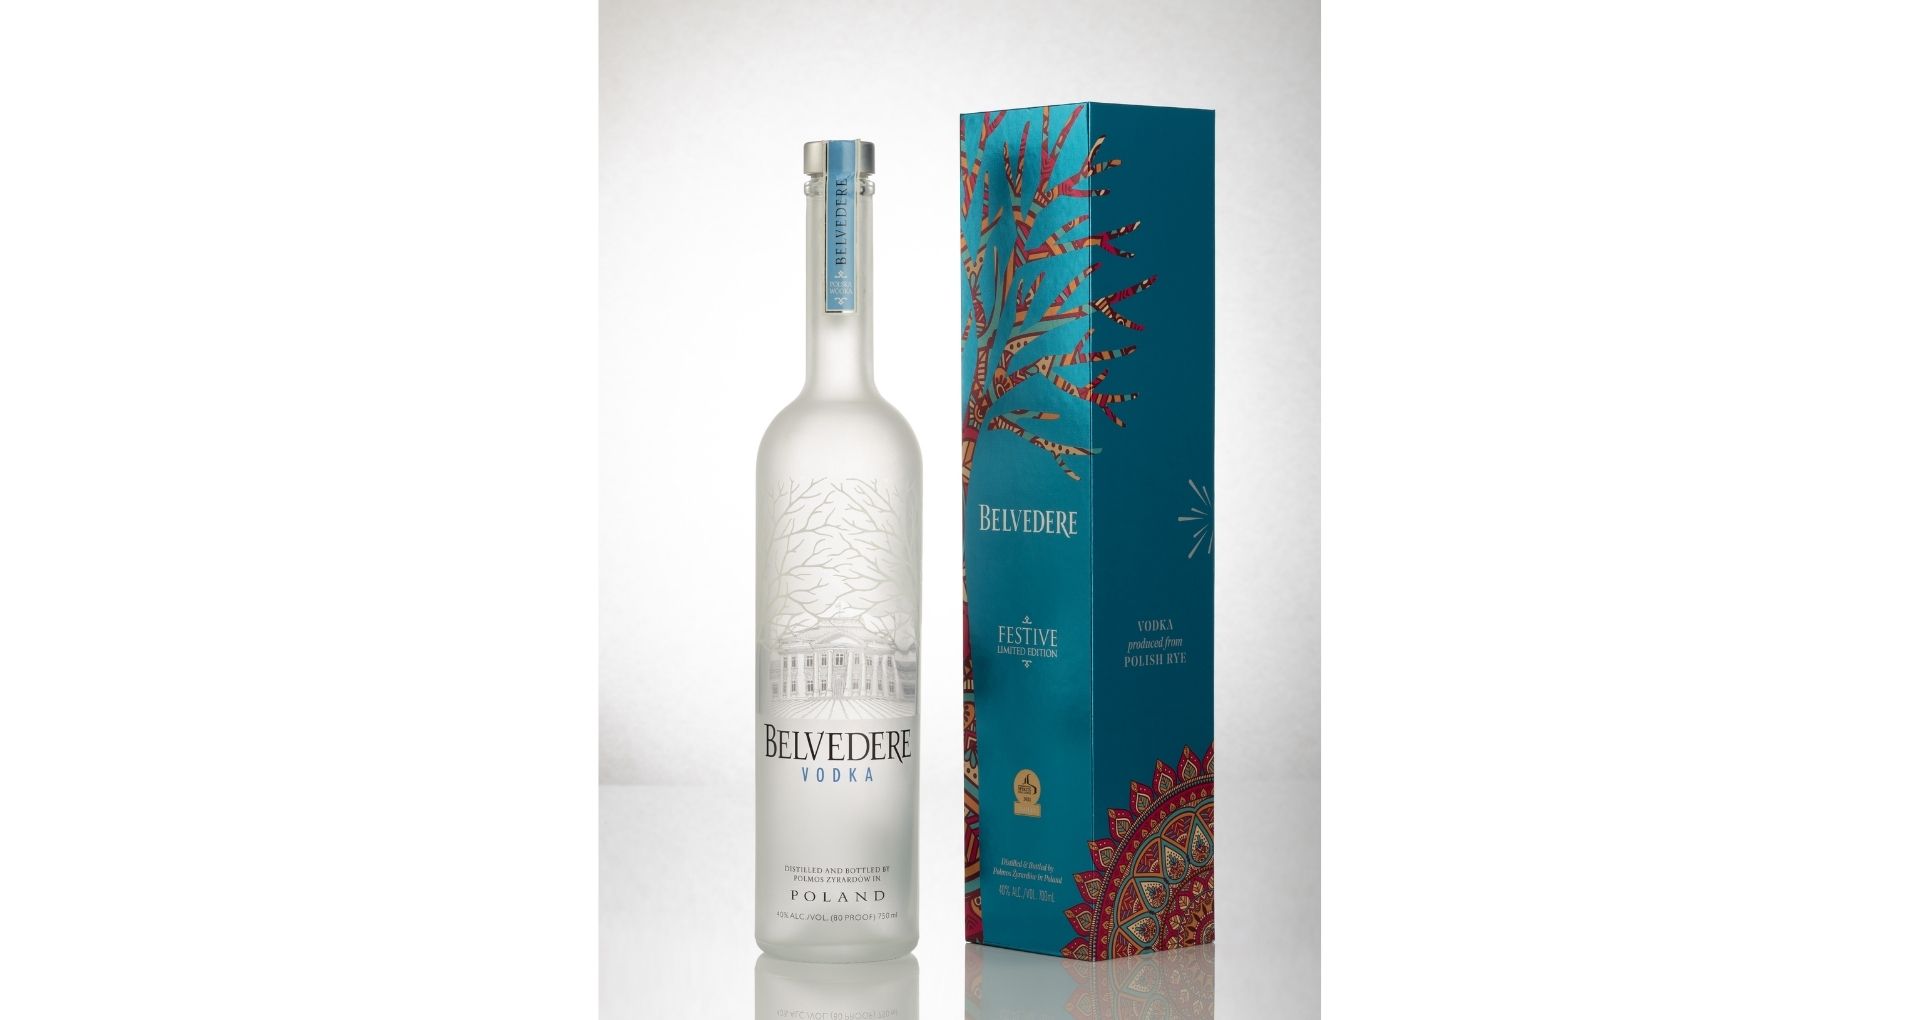 Belvedere debuts its limited edition India inspired festive pack